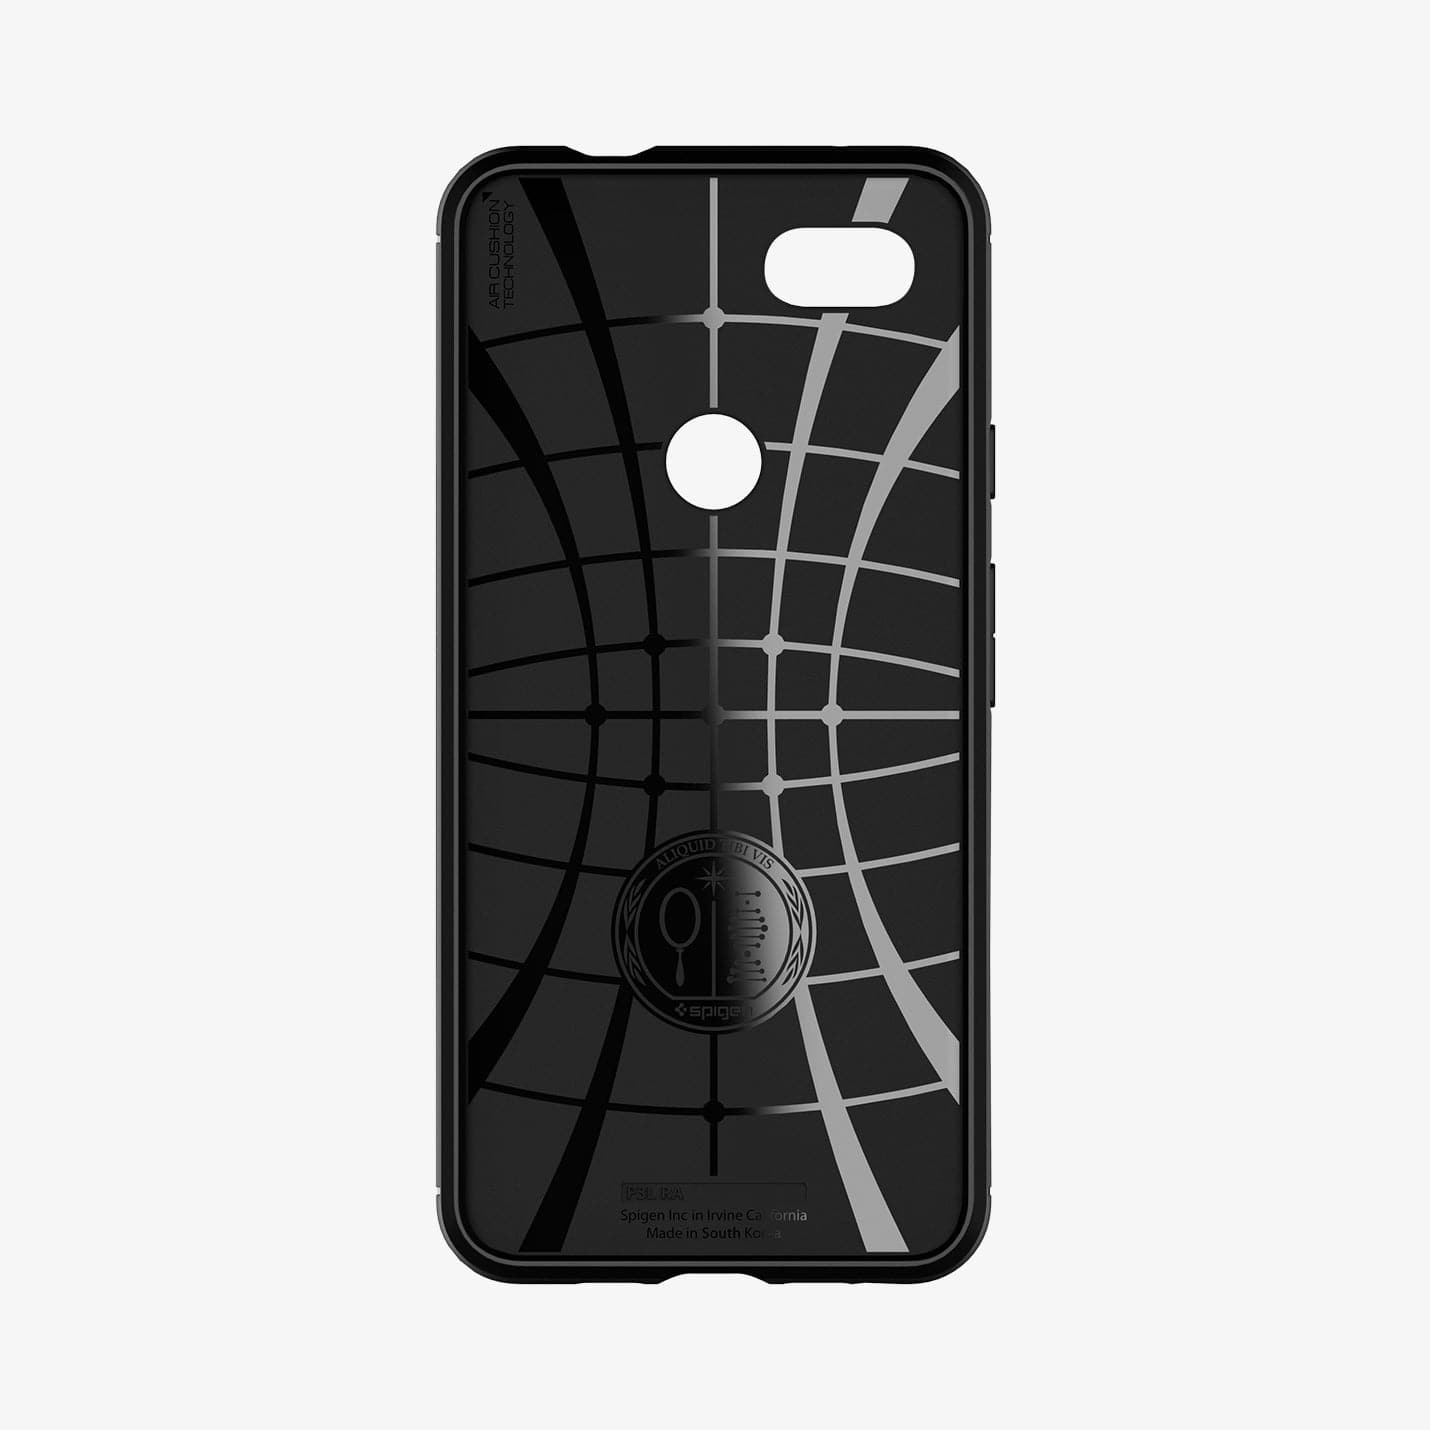 F23CS25960 - Pixel 3a Case Rugged Armor in matte black showing the inside of case